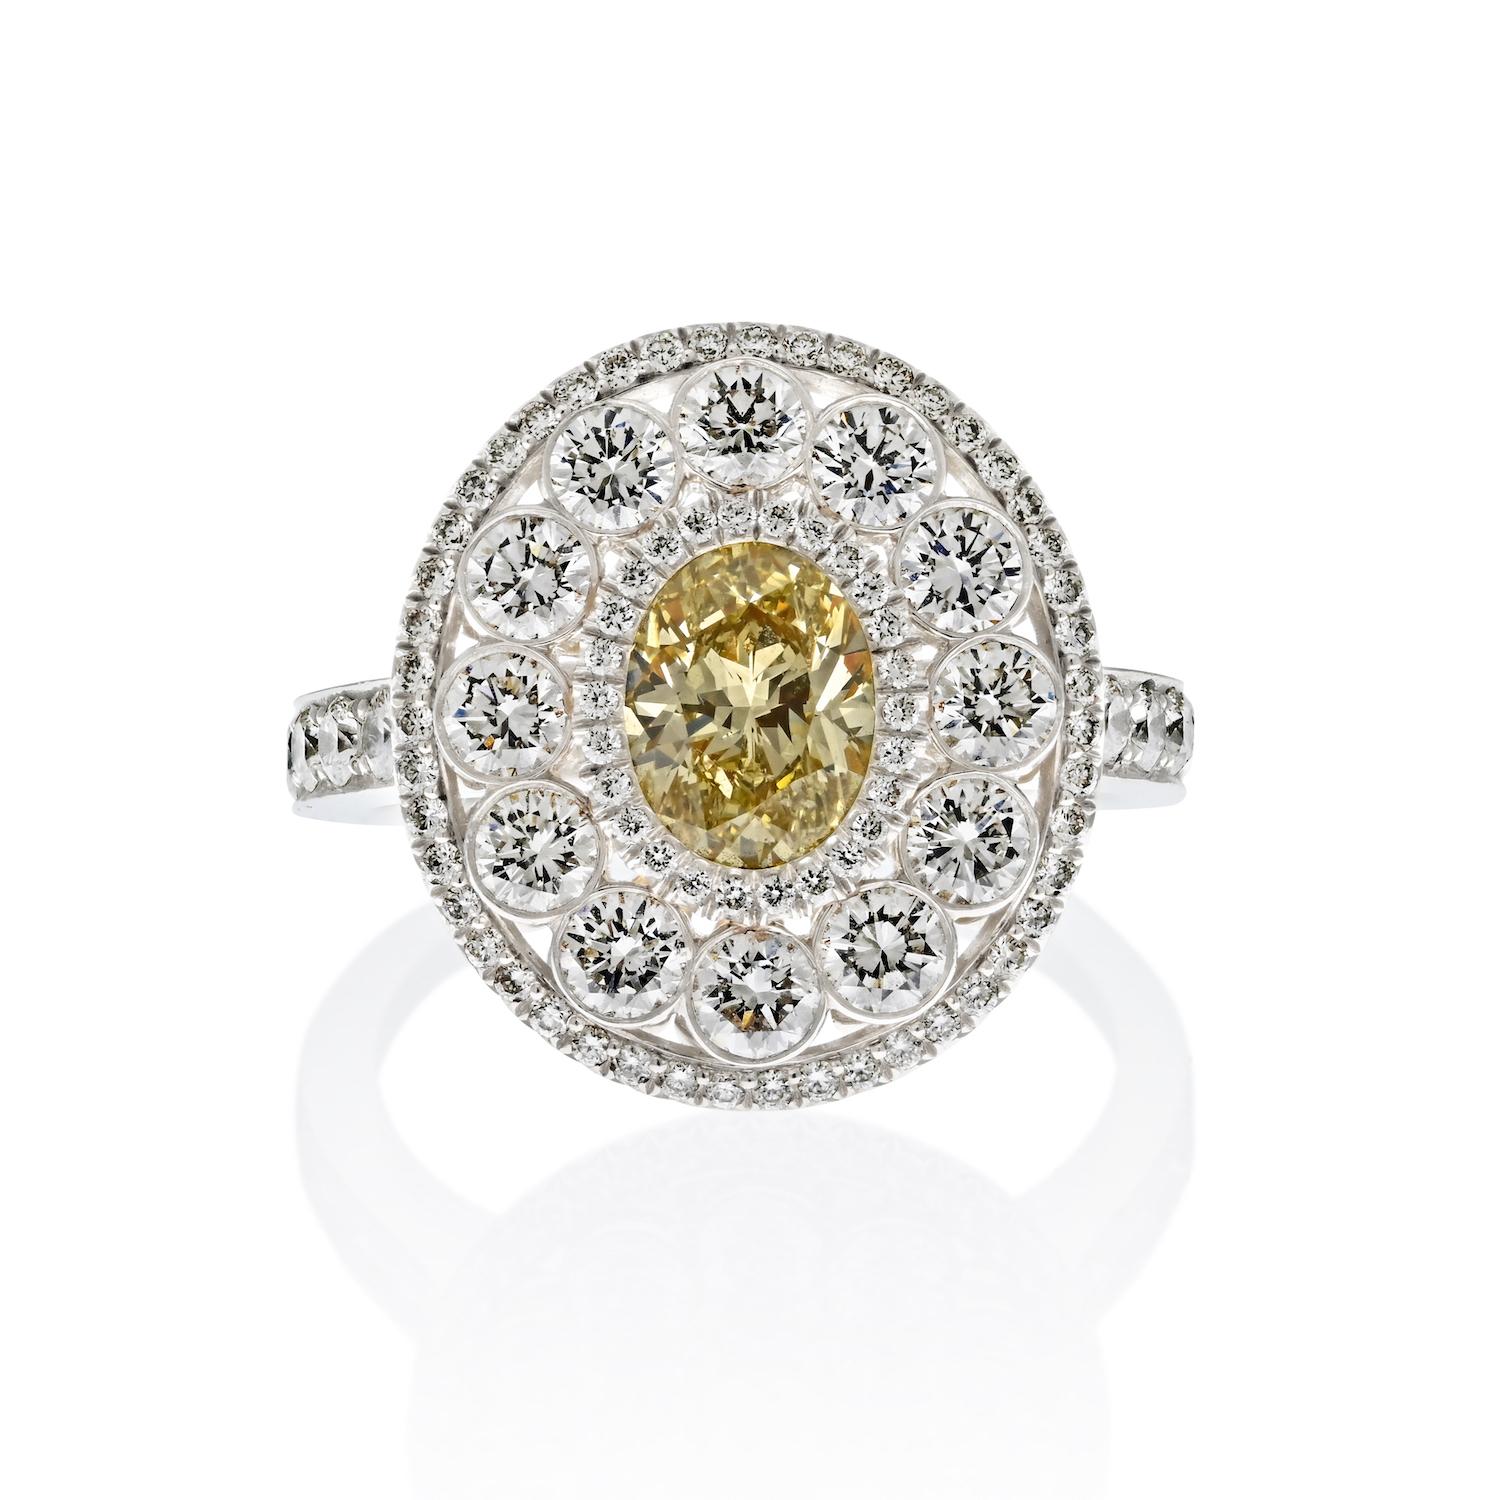 This meticulously handmade ring is a fusion of elegance and artistry, crafted in a combination of platinum and 18k yellow gold.

At its heart, it boasts a radiant 1.03-carat light fancy yellow oval-cut diamond, graced with impeccable VS1